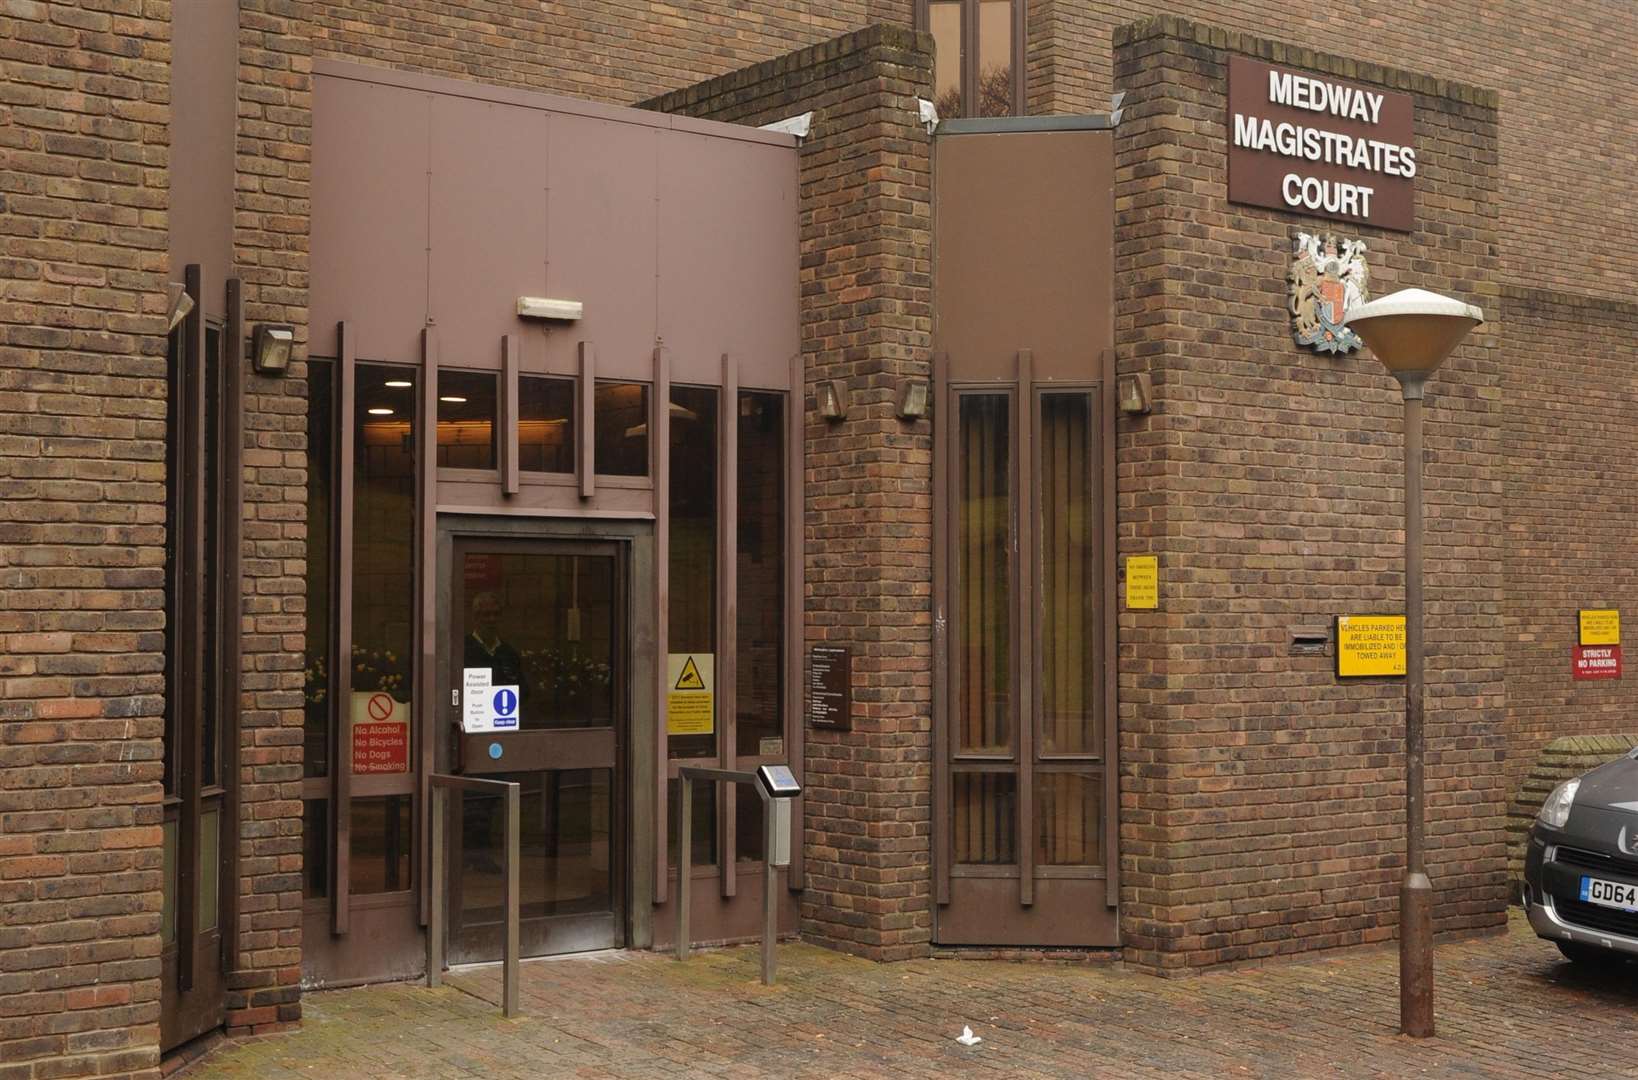 Robinson appeared at Medway Magistrates Court